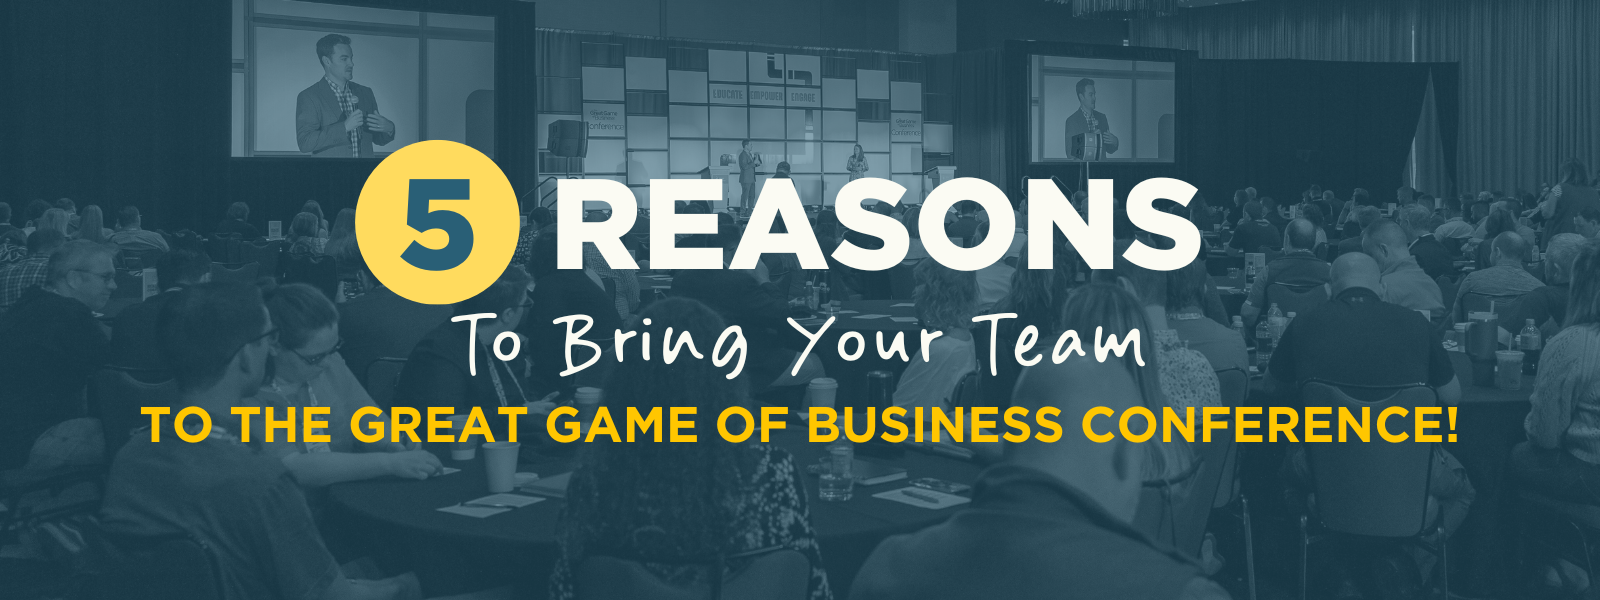 5 Reasons to Bring Your Team to The Great Game of Business Conference